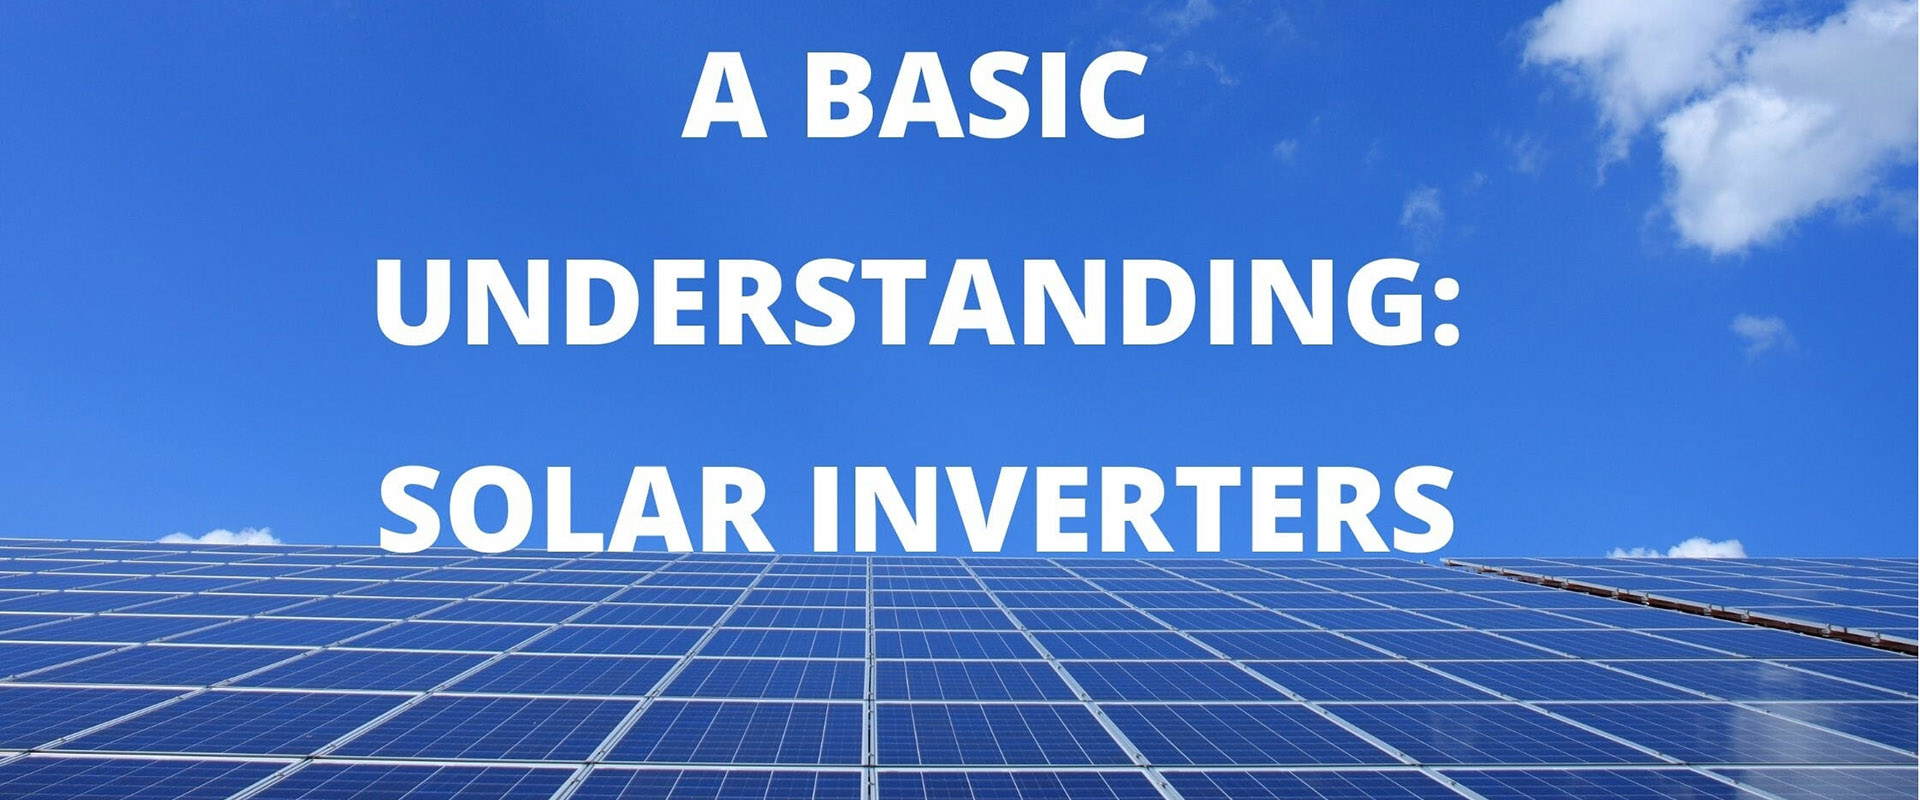 Solar Inverters What Are They And How Do They Work?